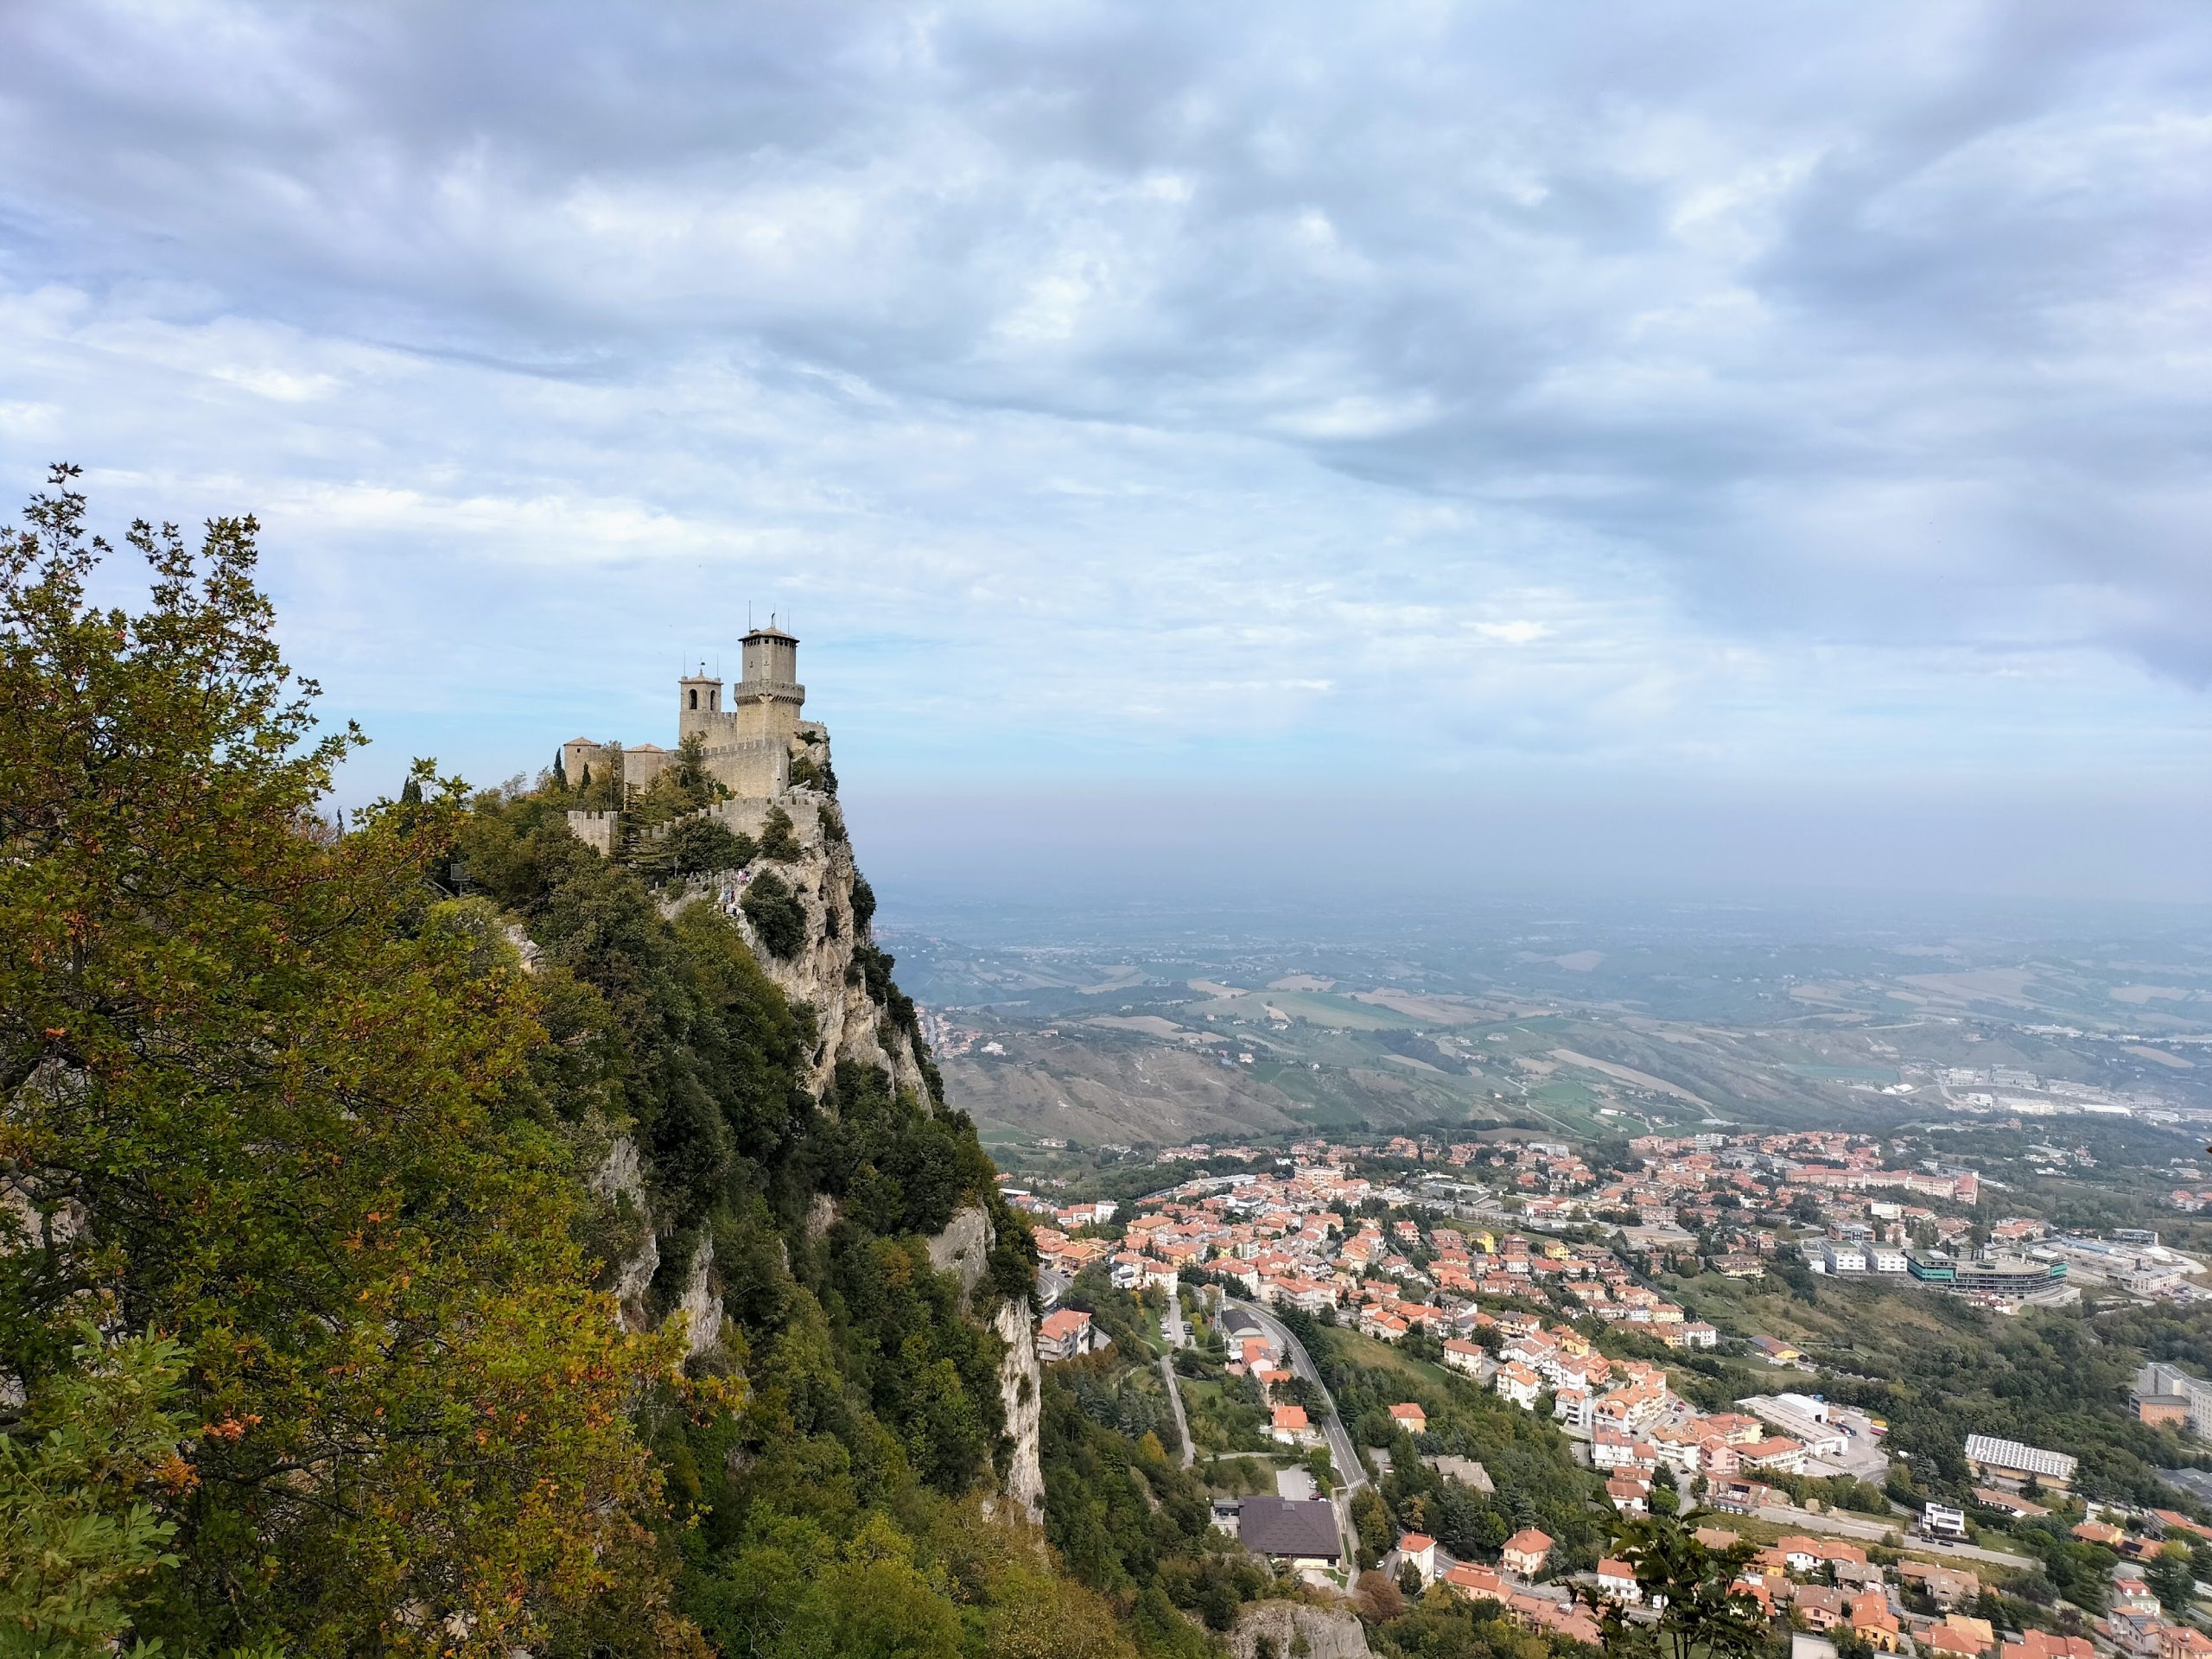 A photo of the first tower of San Marino